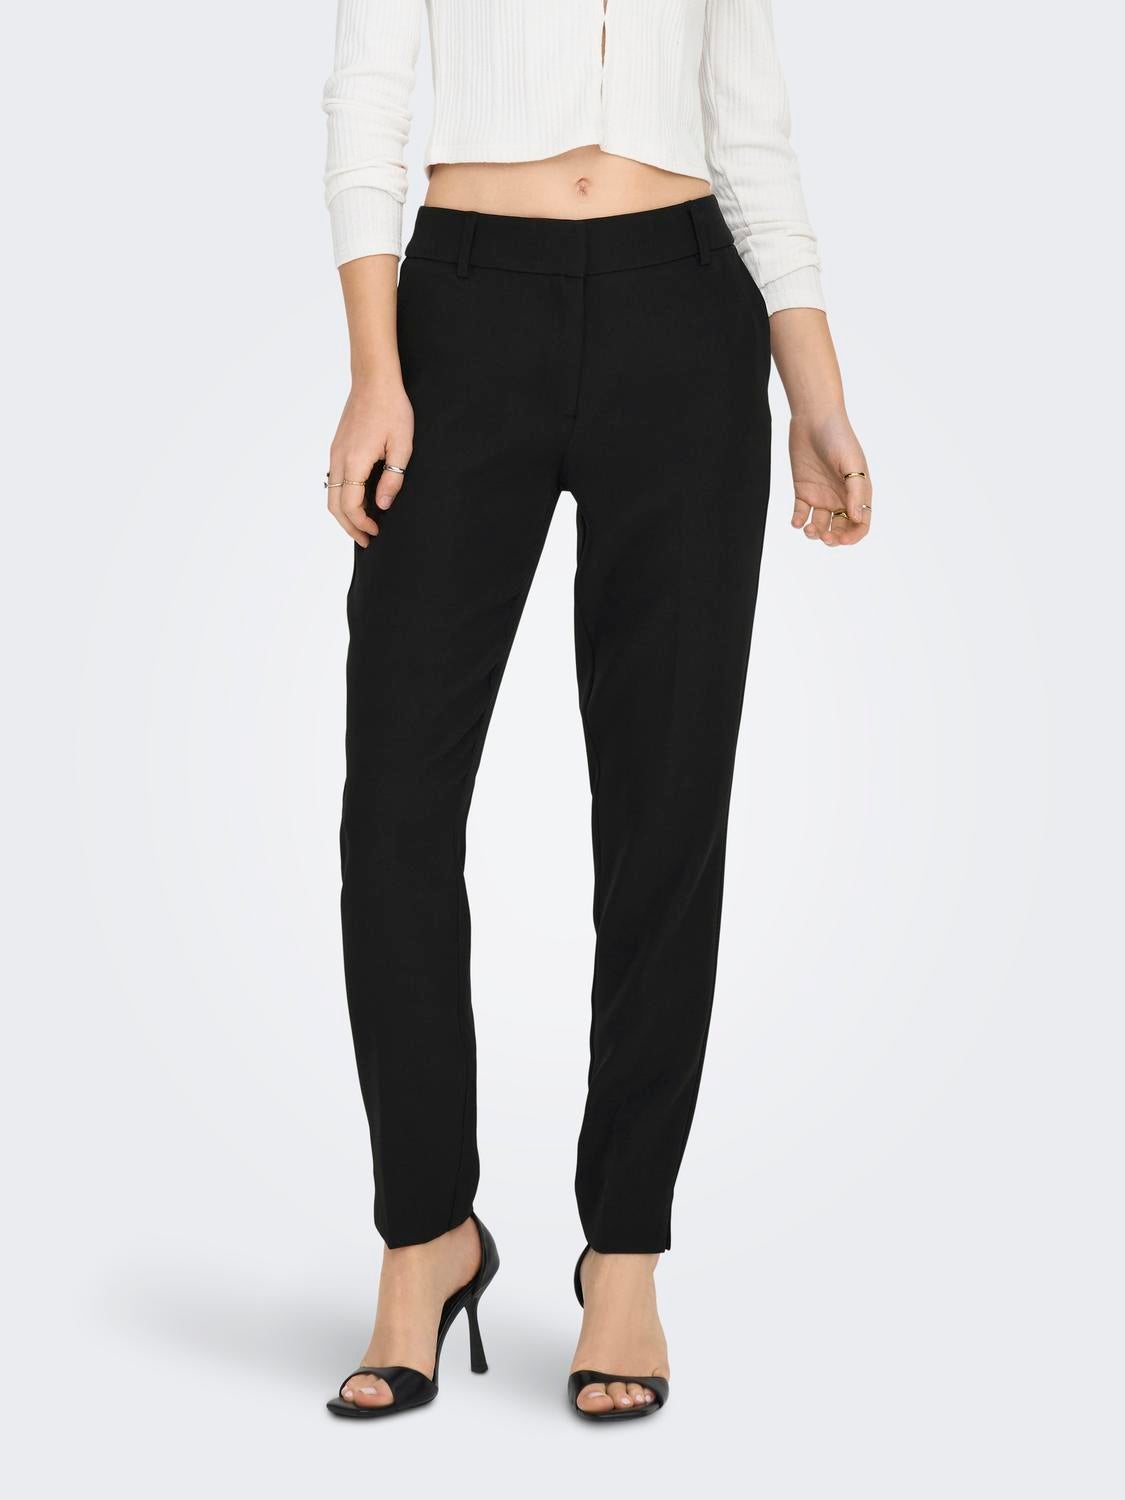 Women's Trousers: Chinos, Culottes & More | ONLY